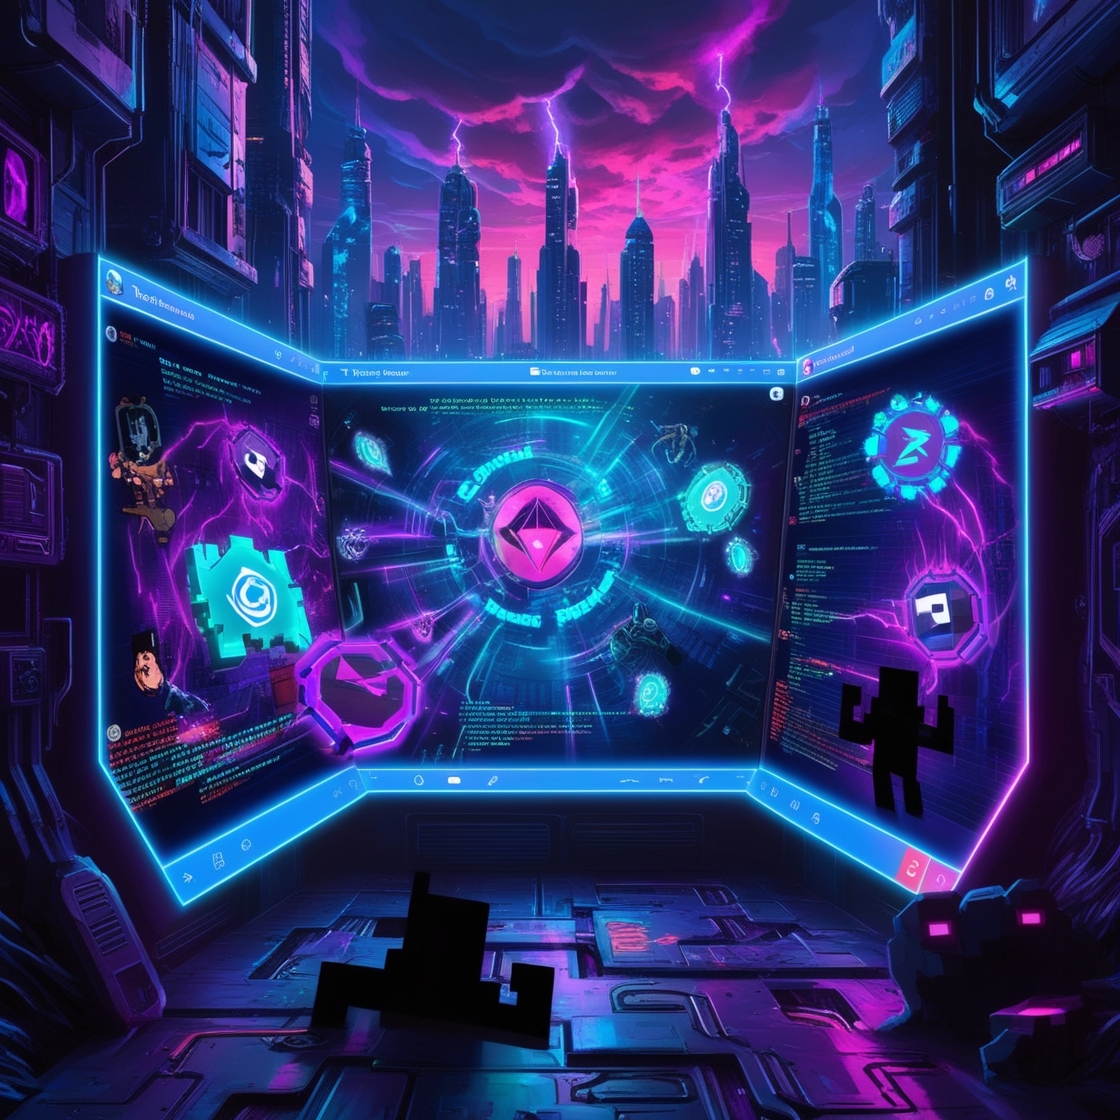 A futuristic digital landscape of cryptic games unfolding within the Telegram chat windows, nestled amidst the neon-lit skyscrapers of a cyberpunk metropolis at dusk, where vibrant hues of electric blue and radiant purple illuminate the darkened alleyways. The screenshot-like image pulsates with a kinetic energy, reminiscent of old-school video games, as cryptographic codes and tokenized assets dance across the screens, while pixelated characters and eerie silhouettes lurk in the shadows, shrouded in an aura of secrecy and high-stakes deception.